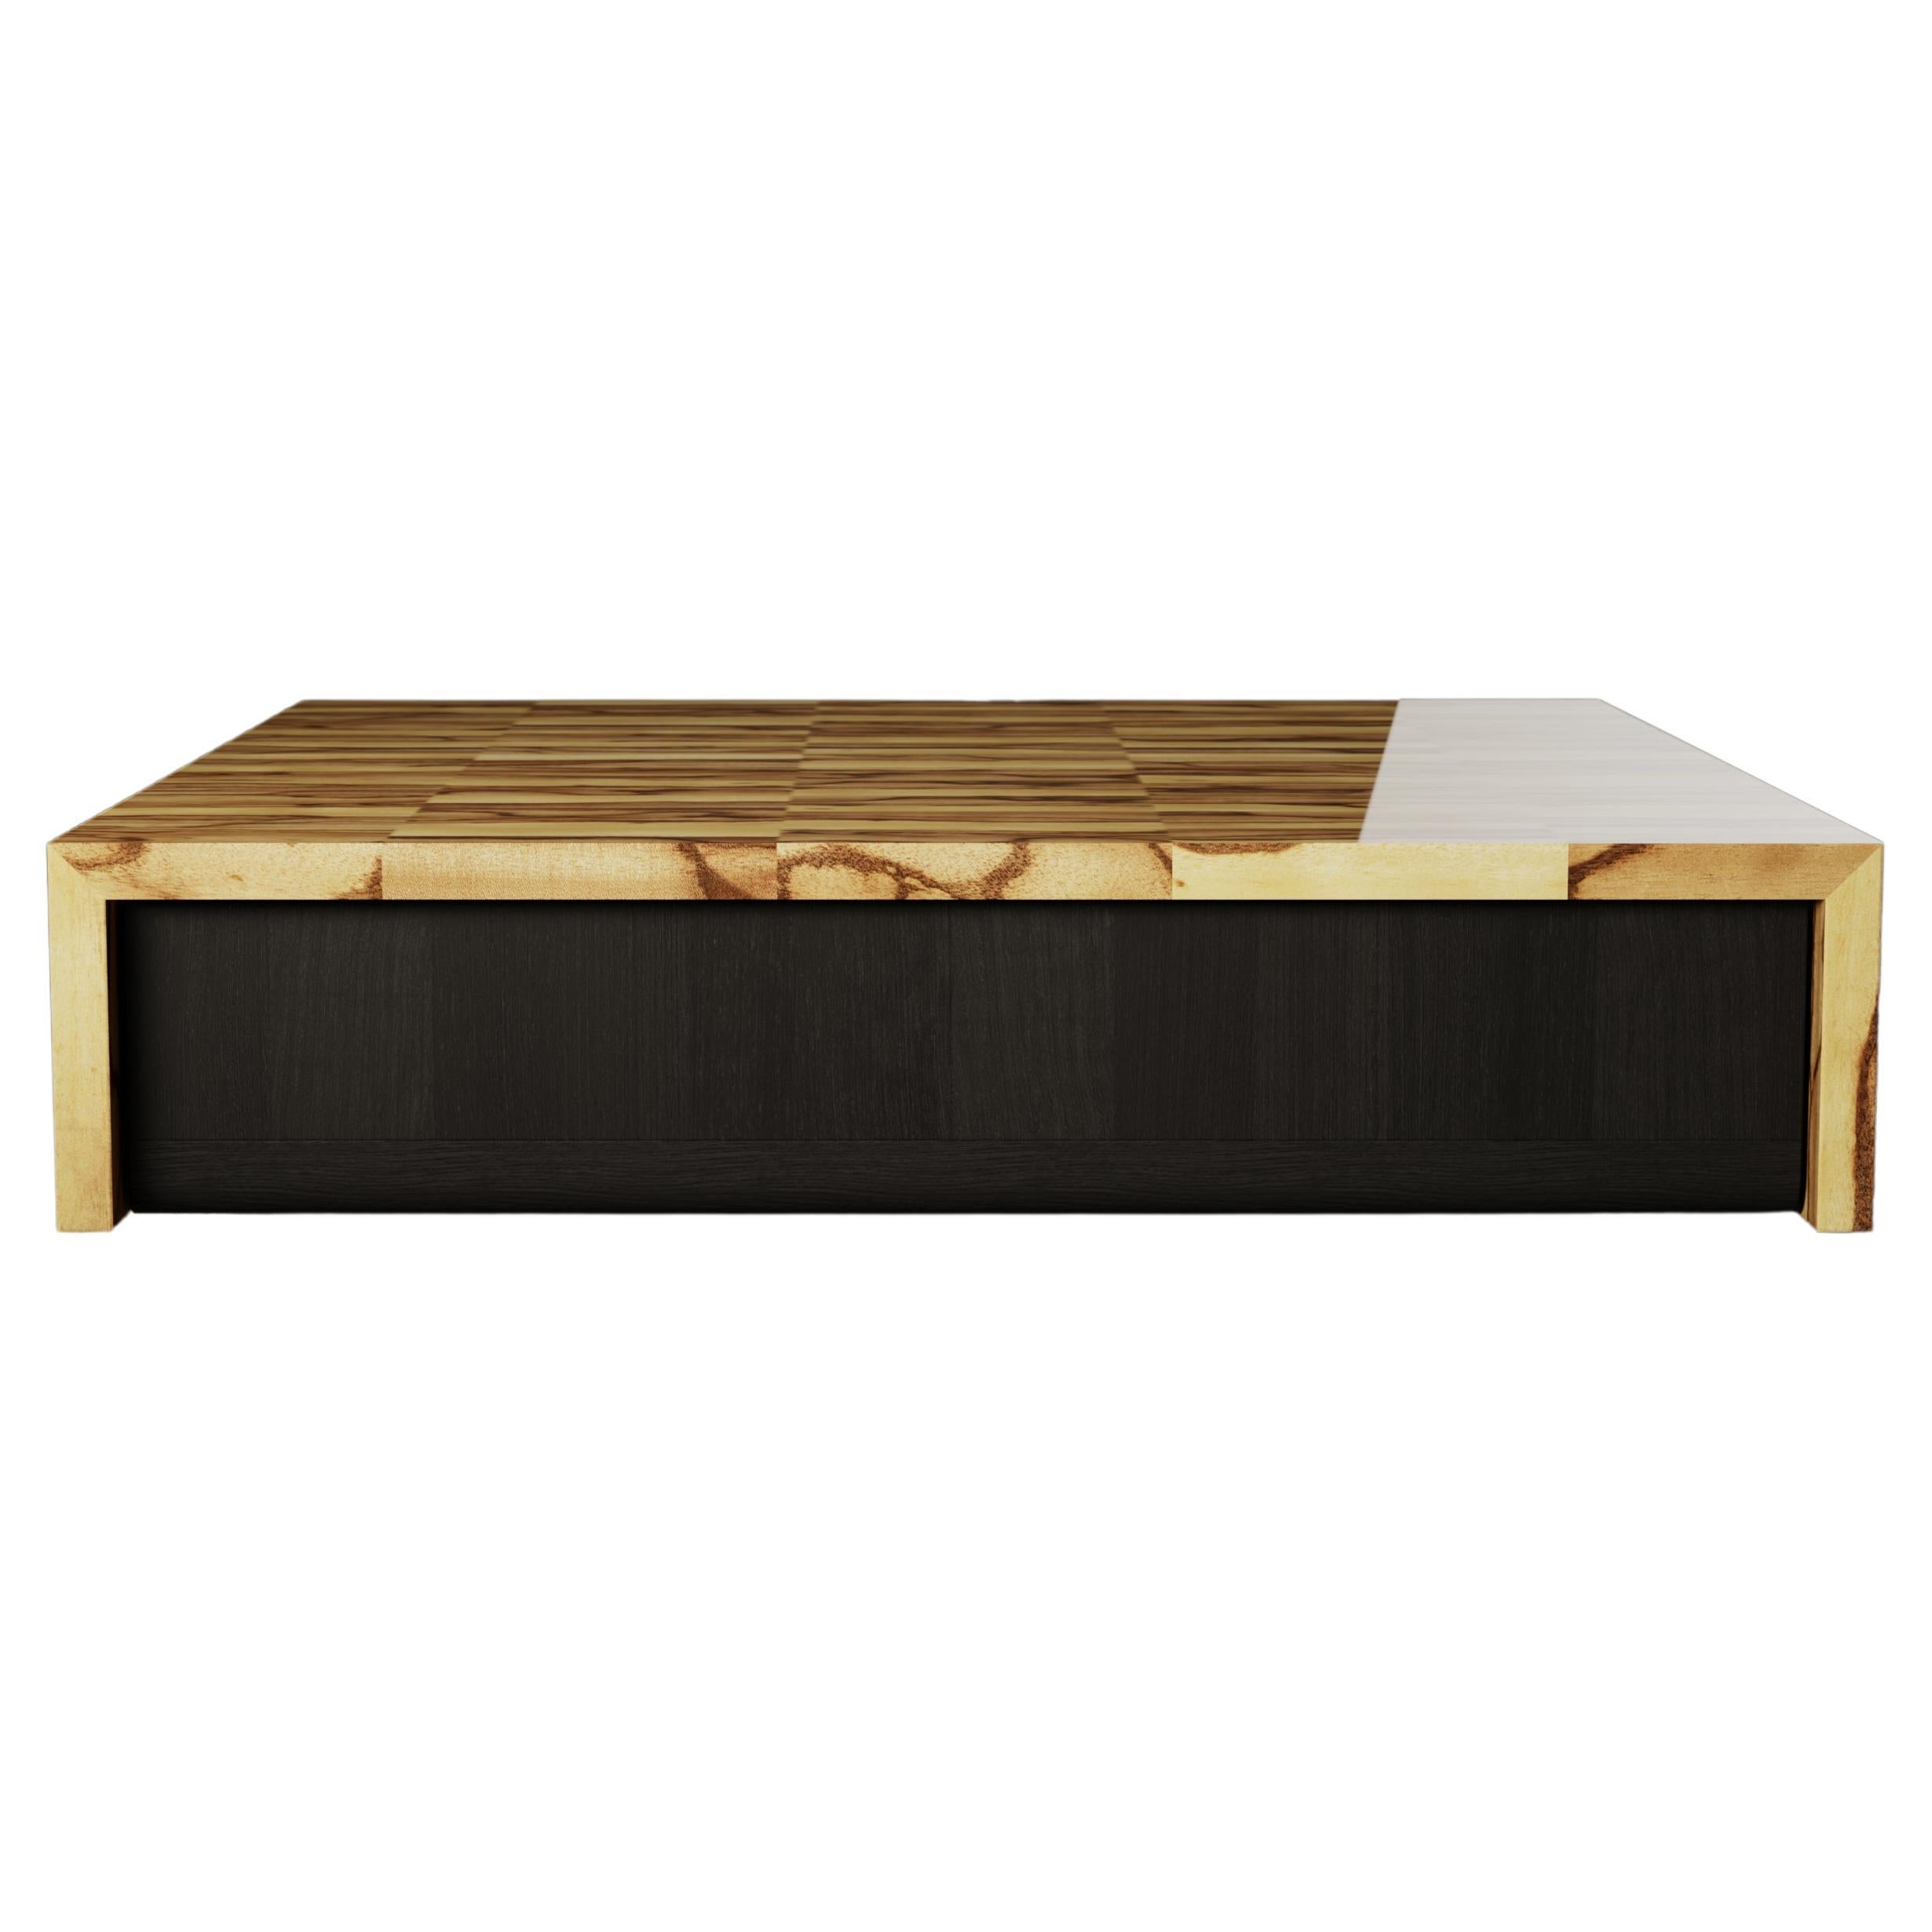 Senza Fine coffee table - READY TO SHIP For Sale